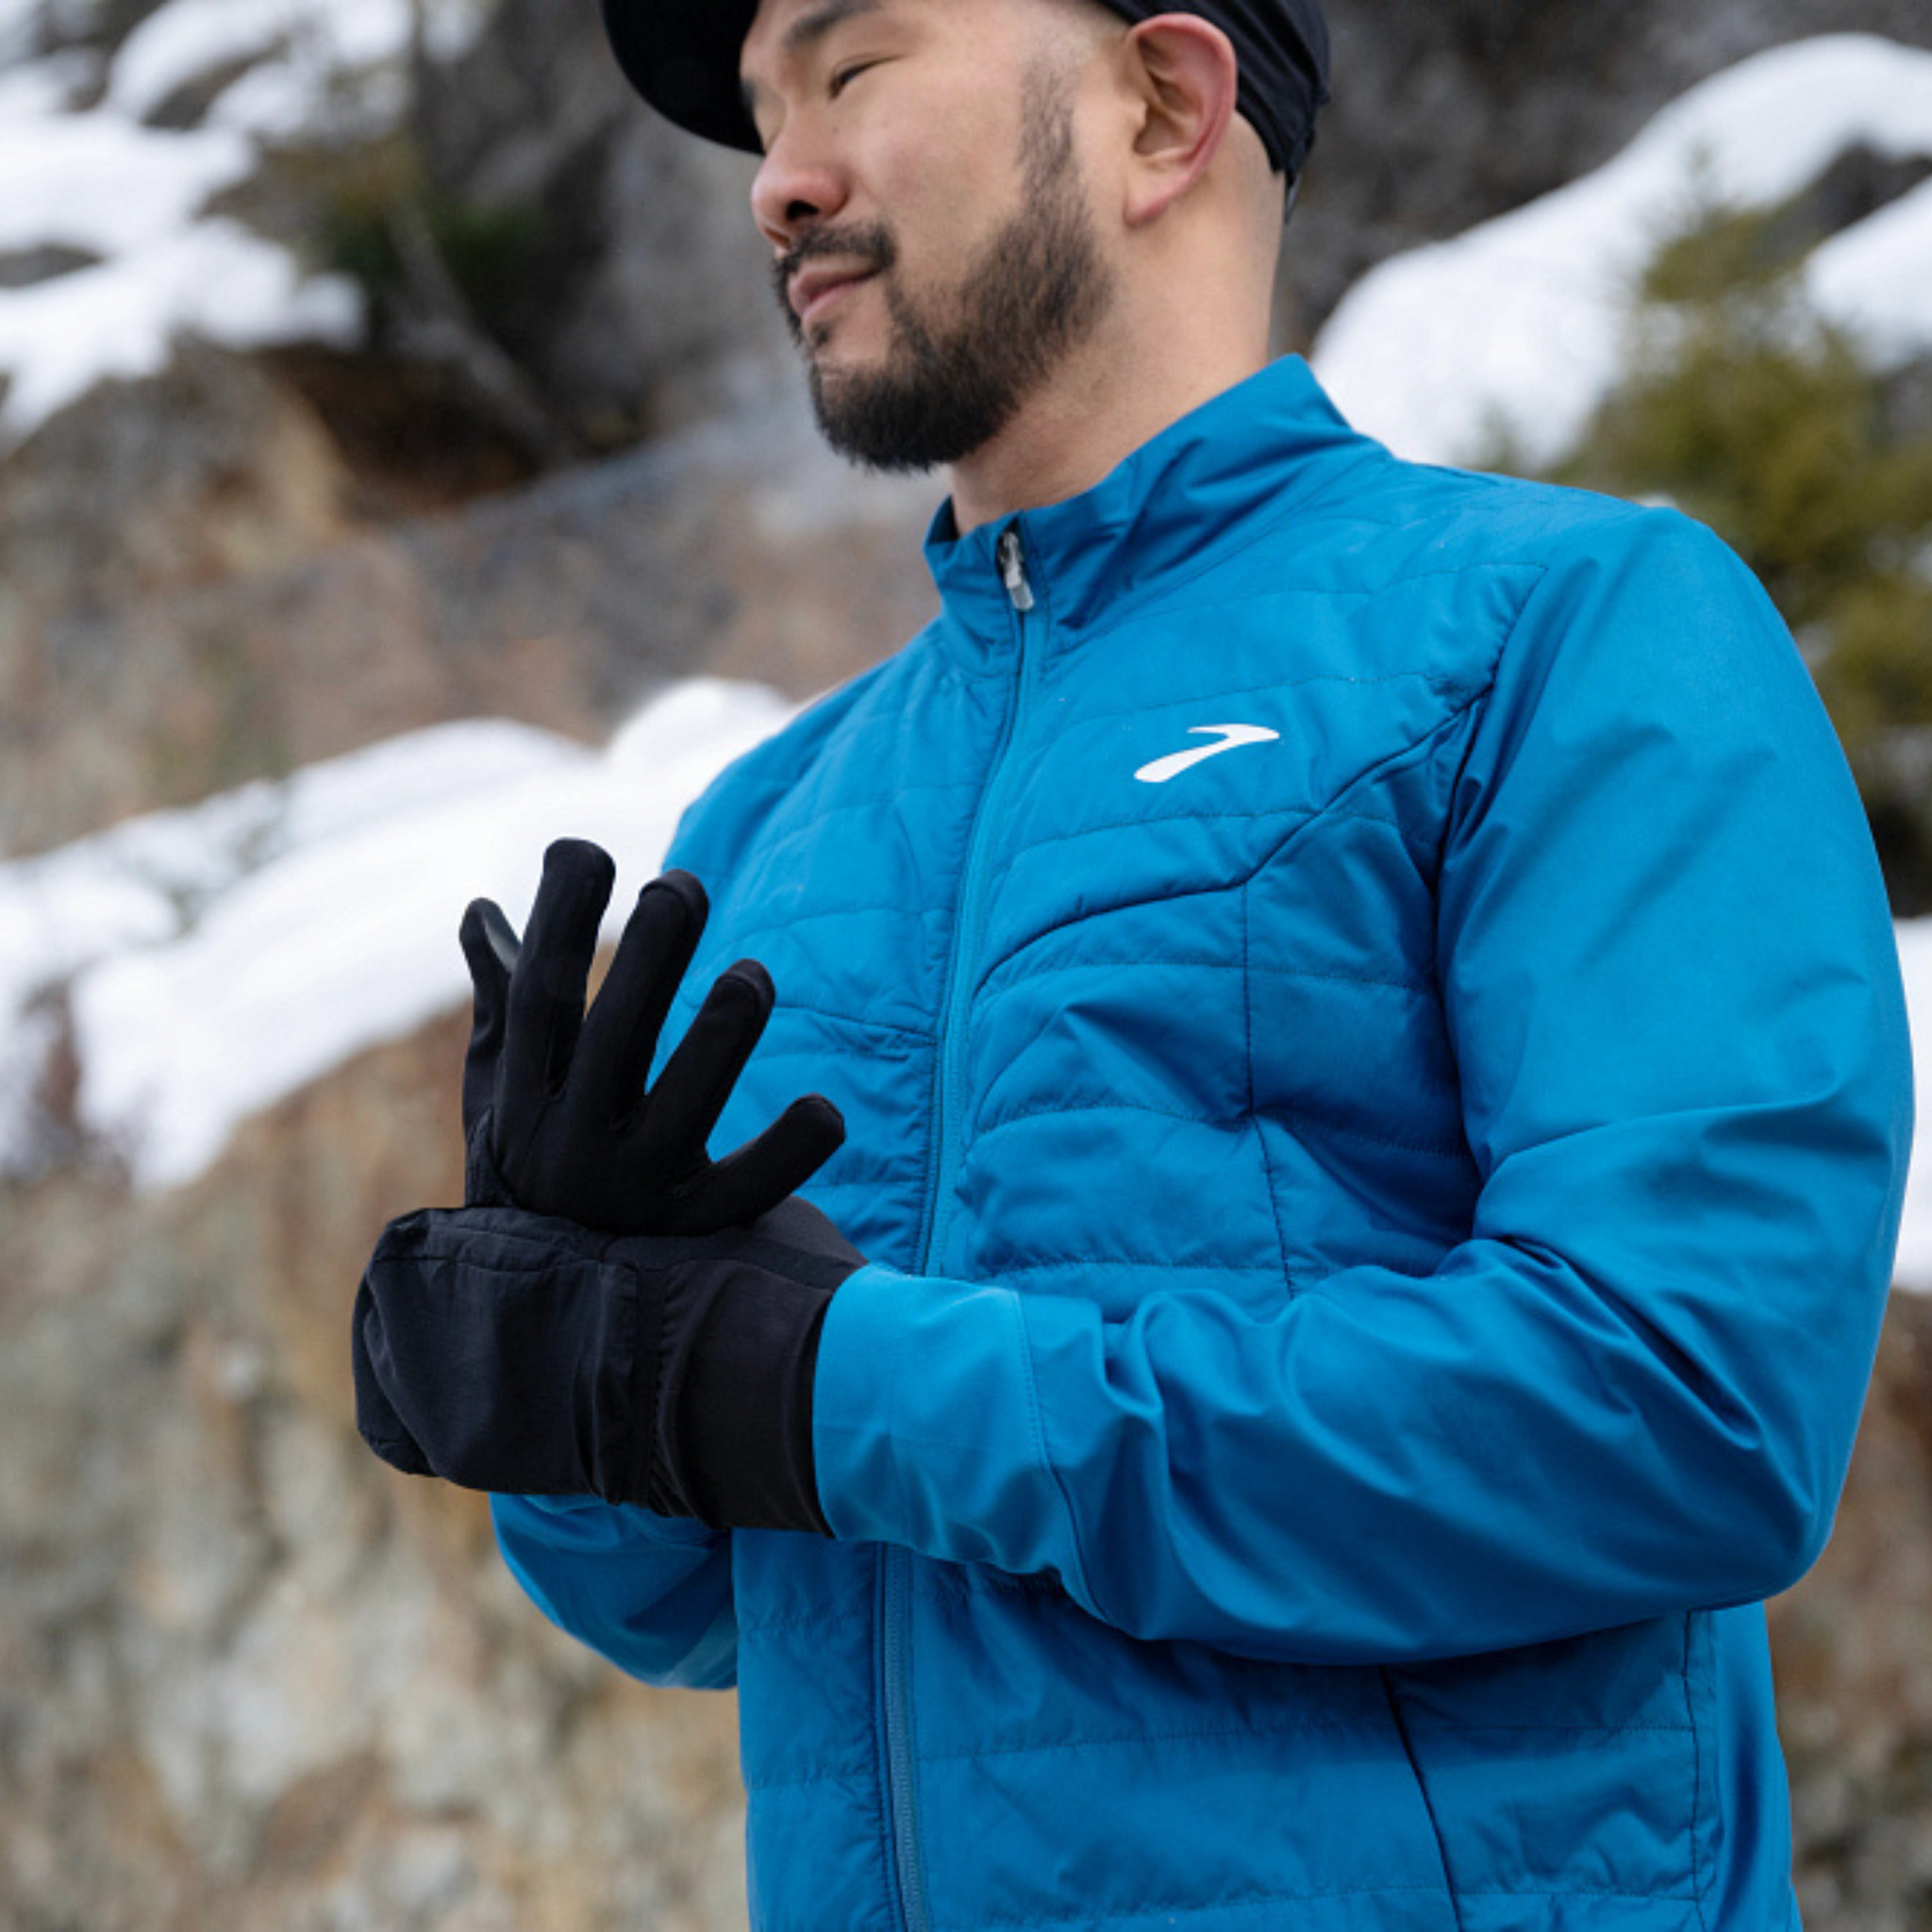 Winter Running Apparel Collection